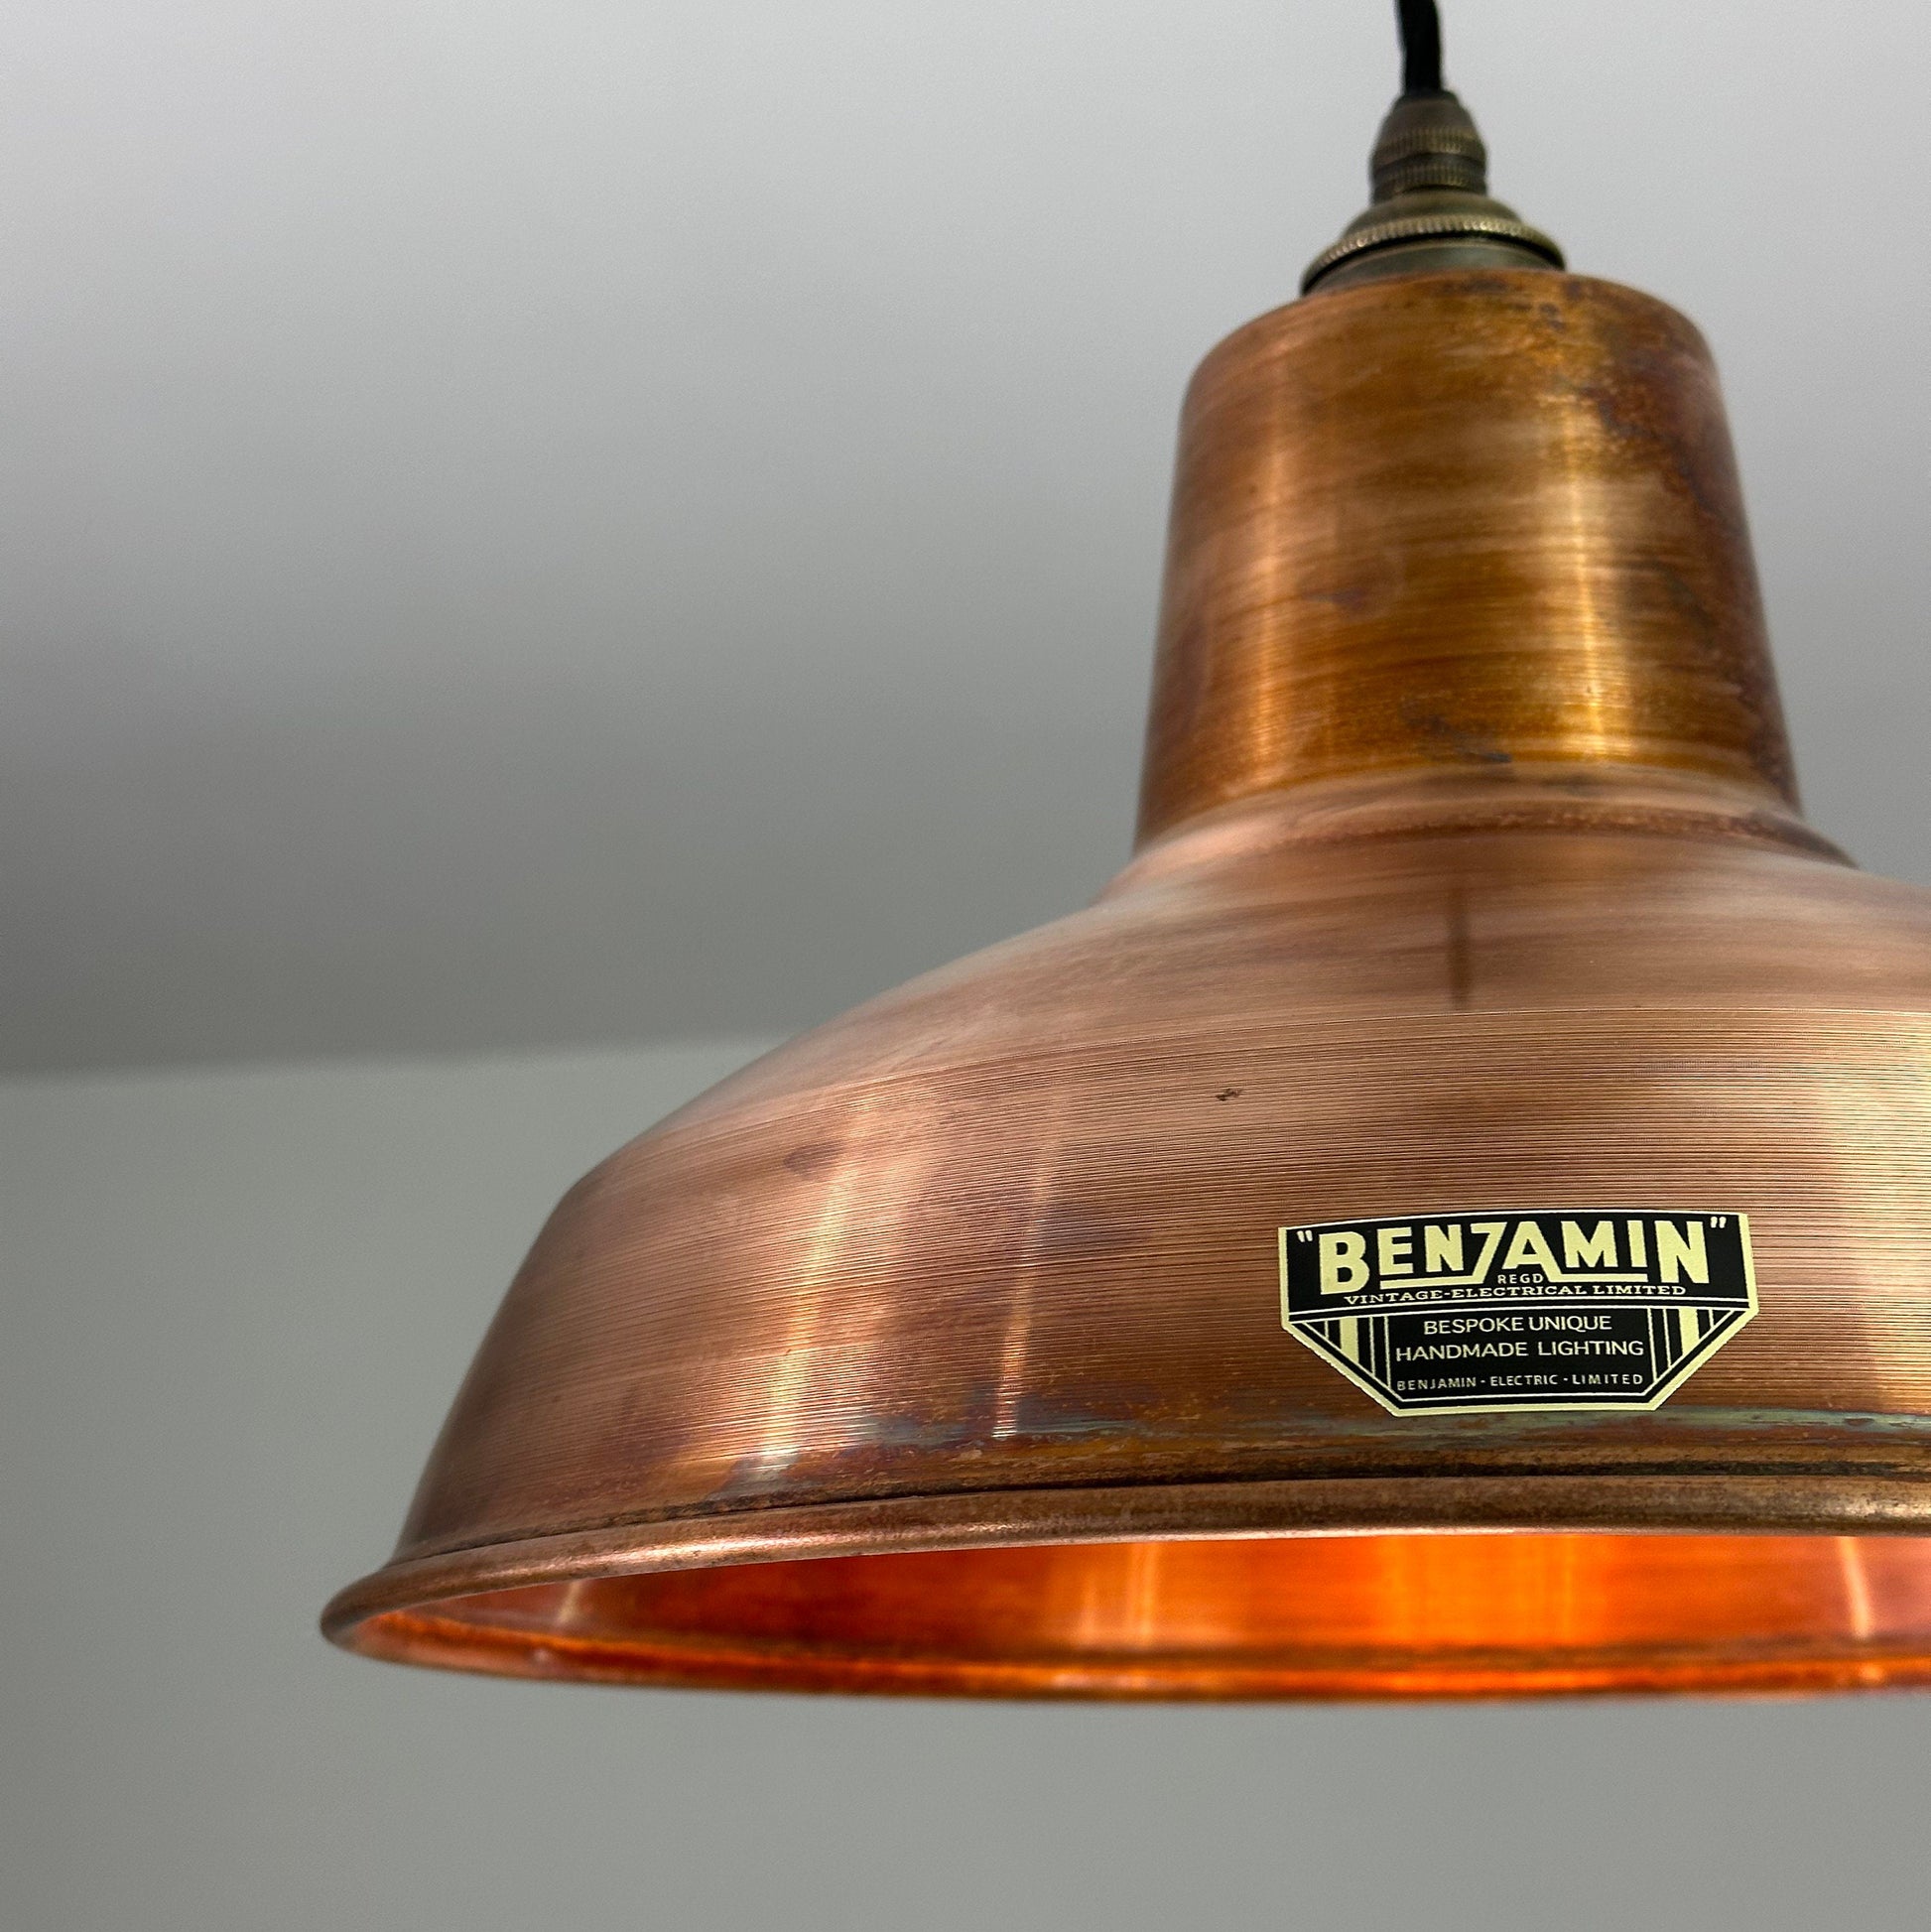 Filby ~ Antique Copper Lampshade Pendant Ceiling Light ~ 12.5 Inch